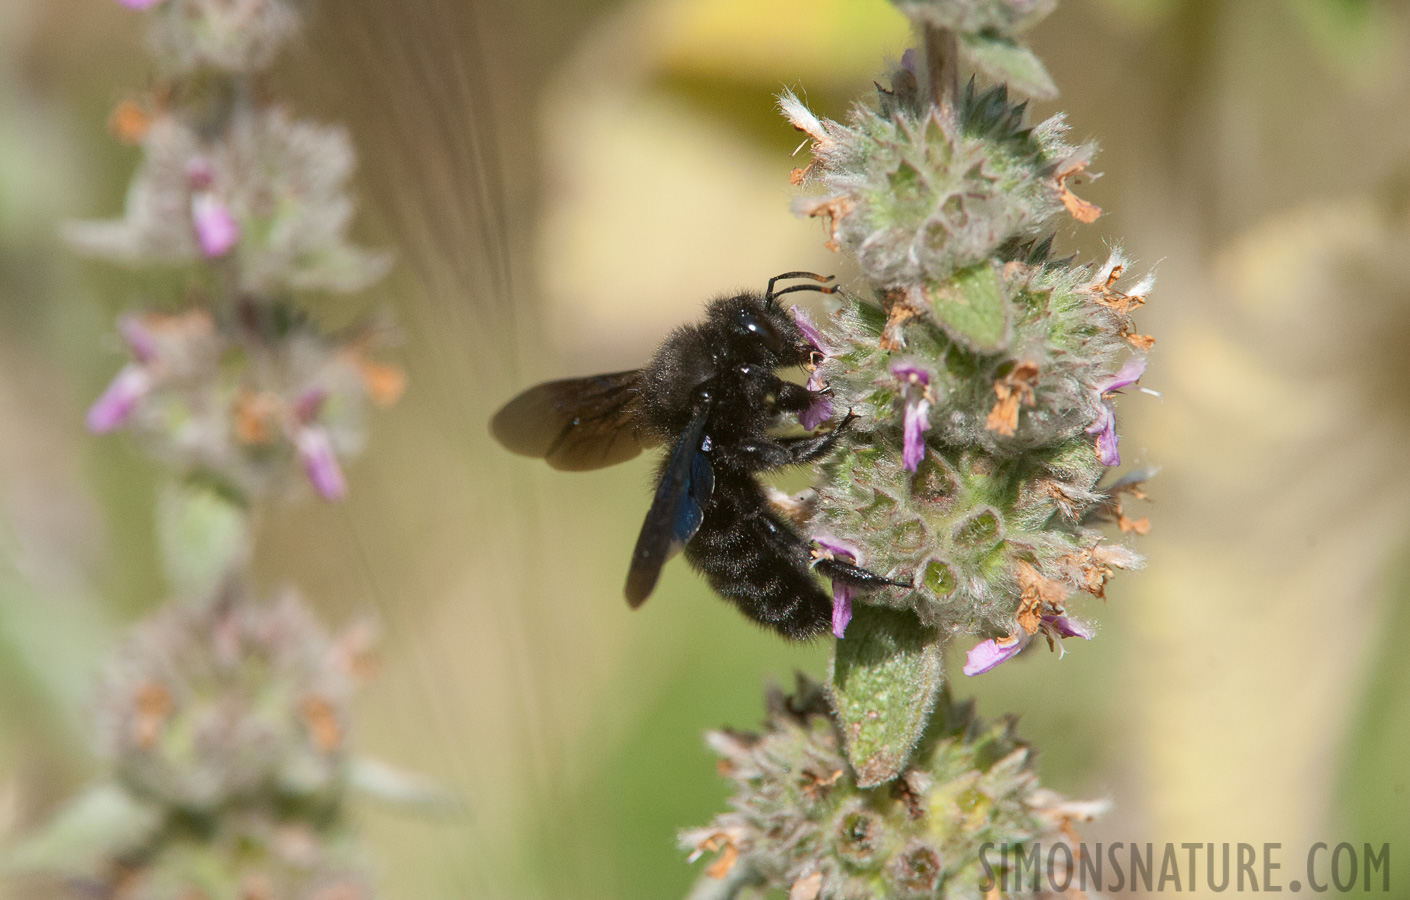 Xylocopa violacea [550 mm, 1/4000 sec at f / 9.0, ISO 2500]